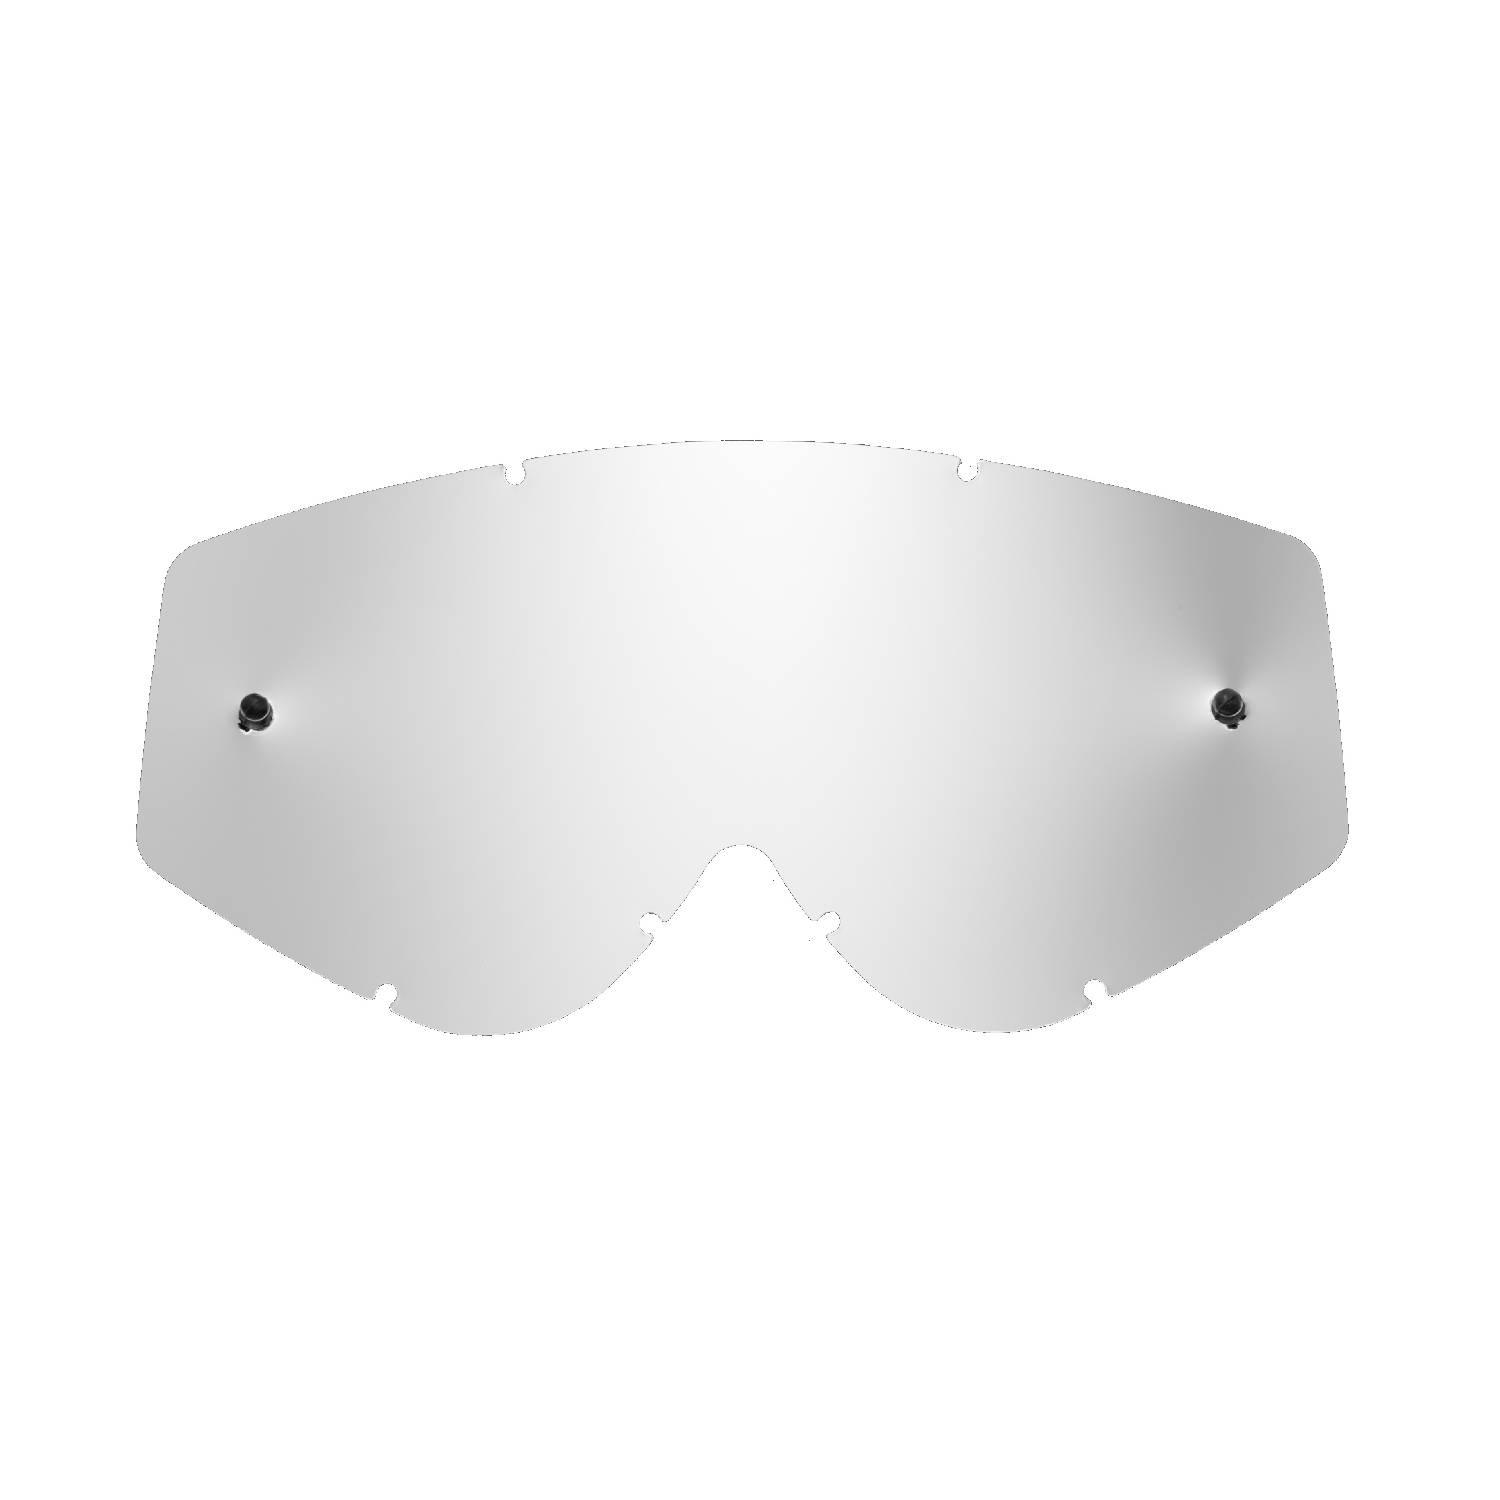 HZ GMZ  SE-411112-HZ silver replacement lenses for goggles